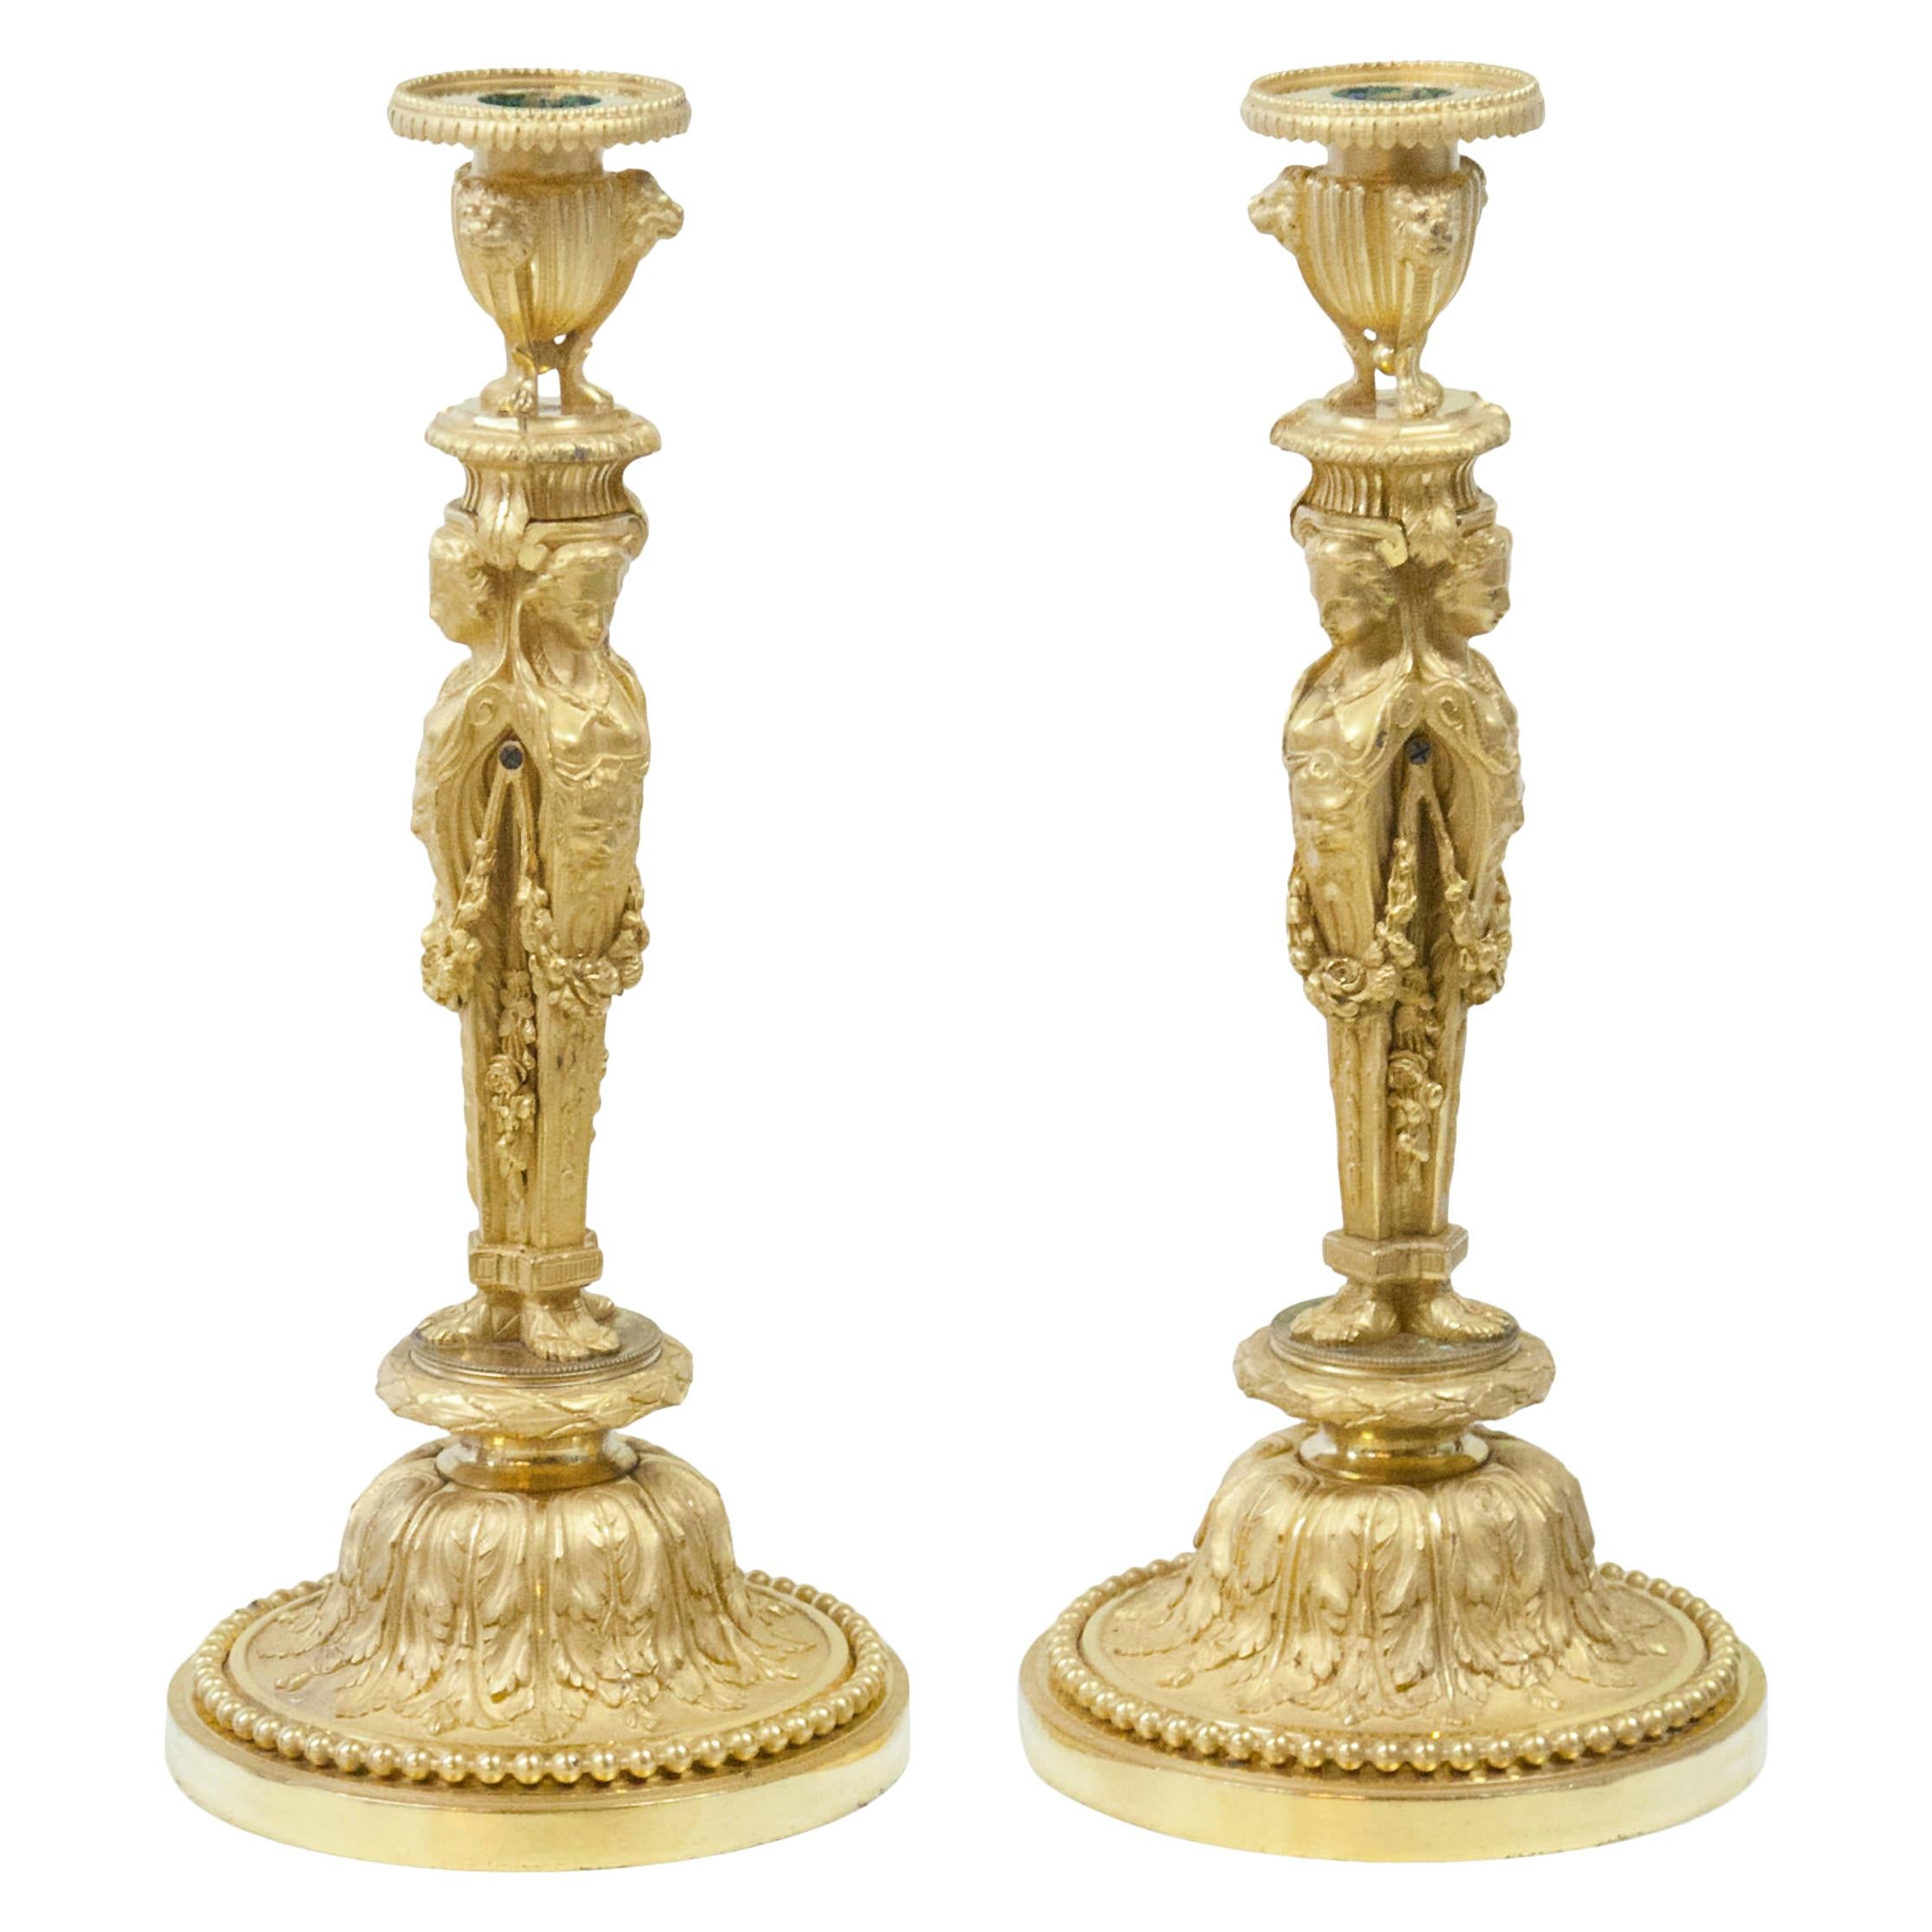 Empire Candlesticks, J.-D. Dugourc, France, Early 19th Century